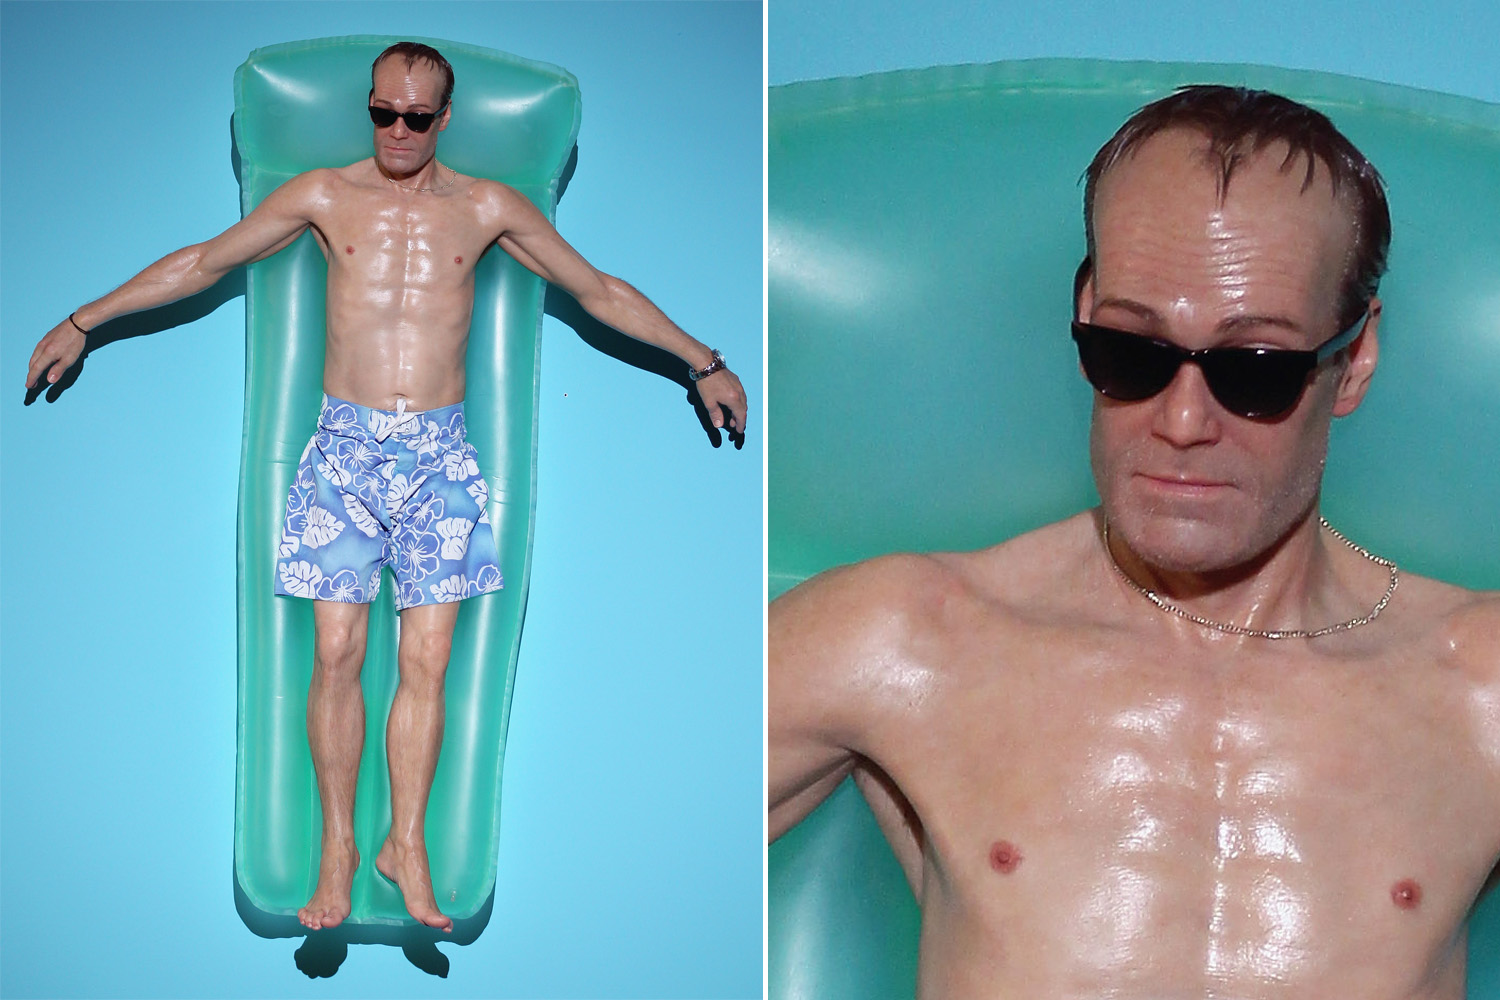 These 18 Sculptures By An Australian Artist Are So Lifelike You’ll Swear They’re Real